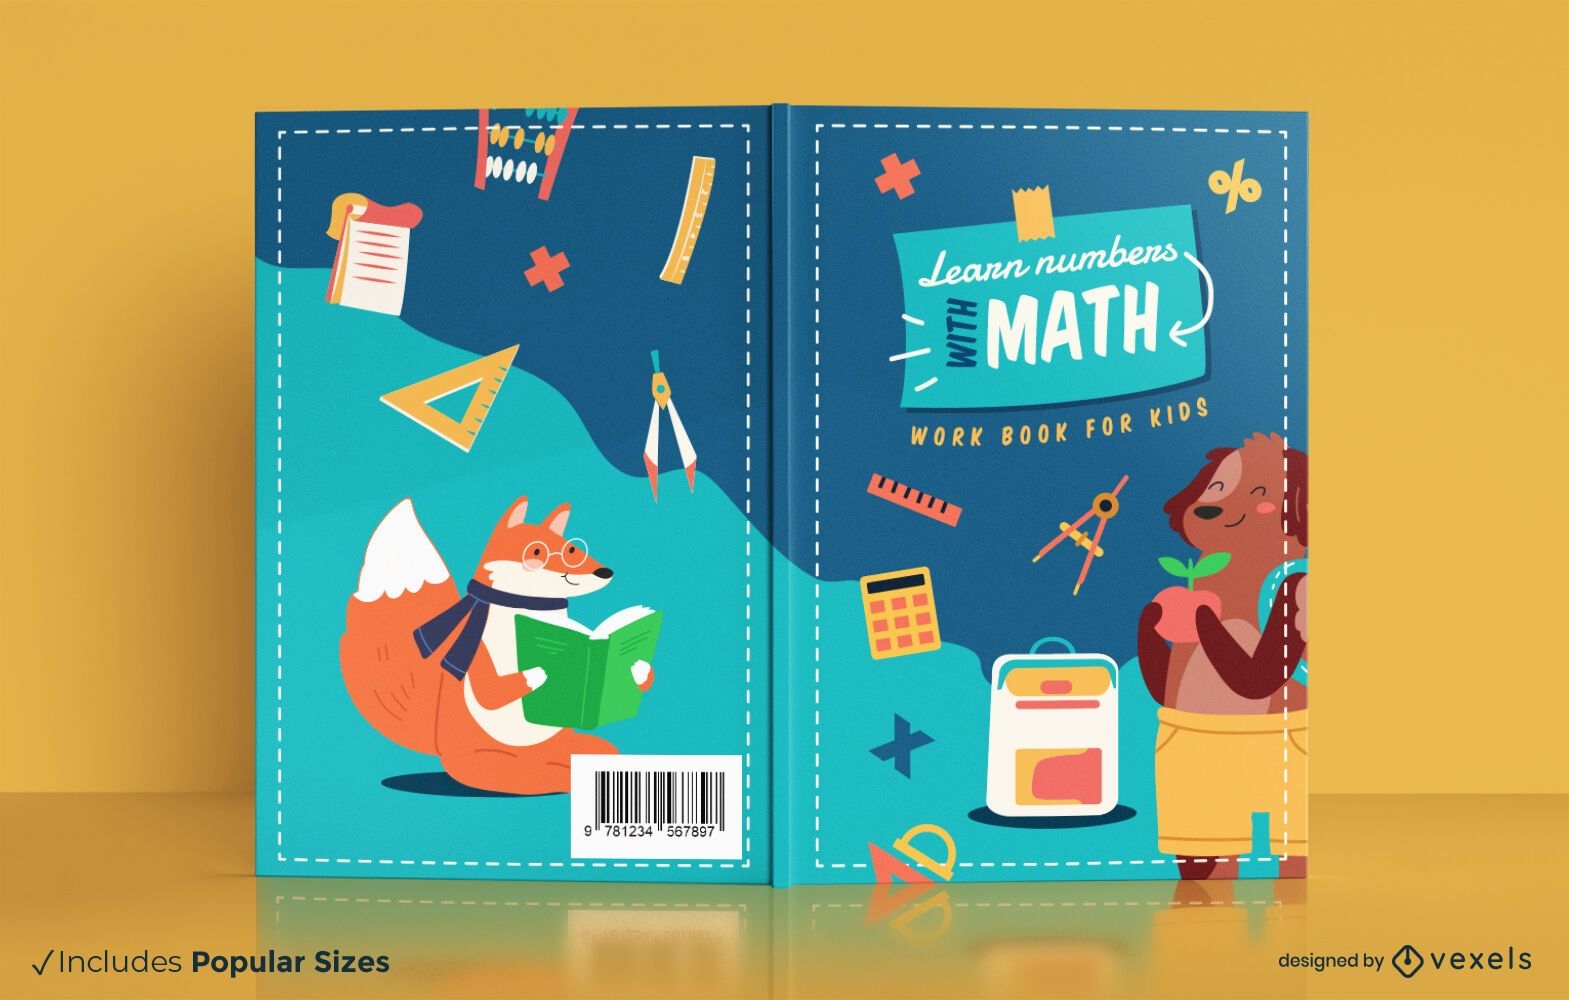 Math learning book for kids cover design